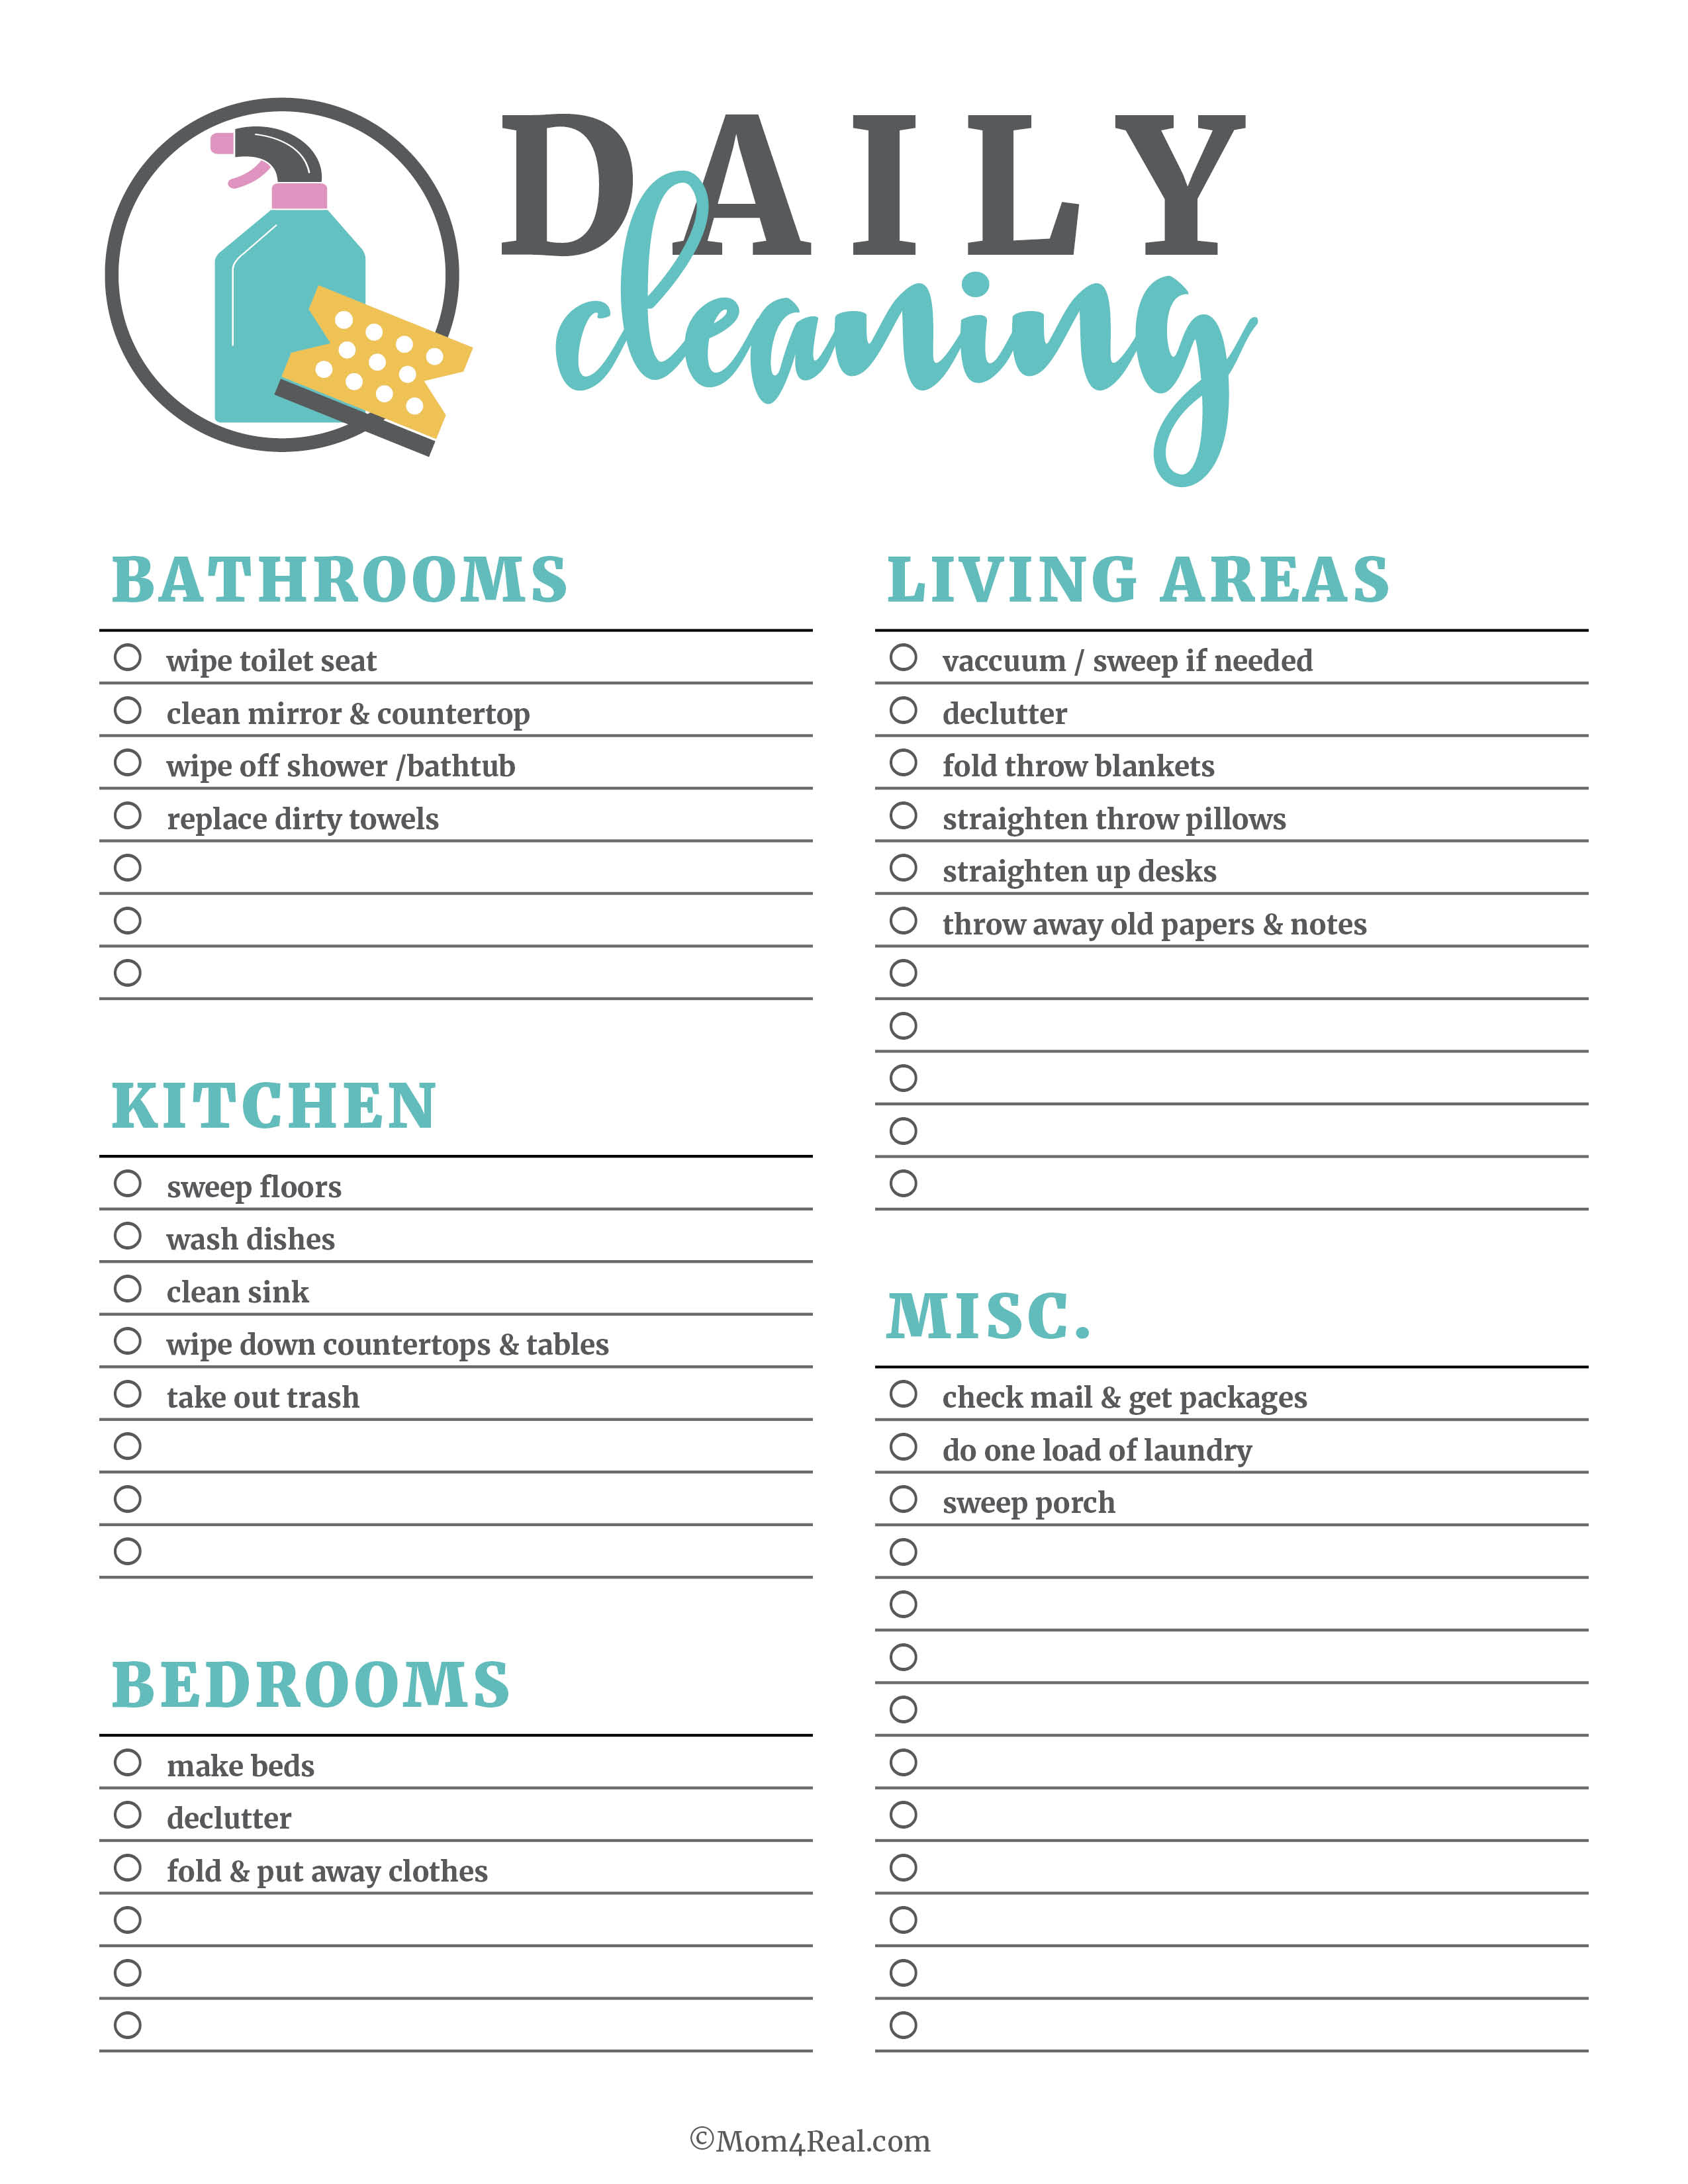 Cleaning Checklist Printable | room surf.com